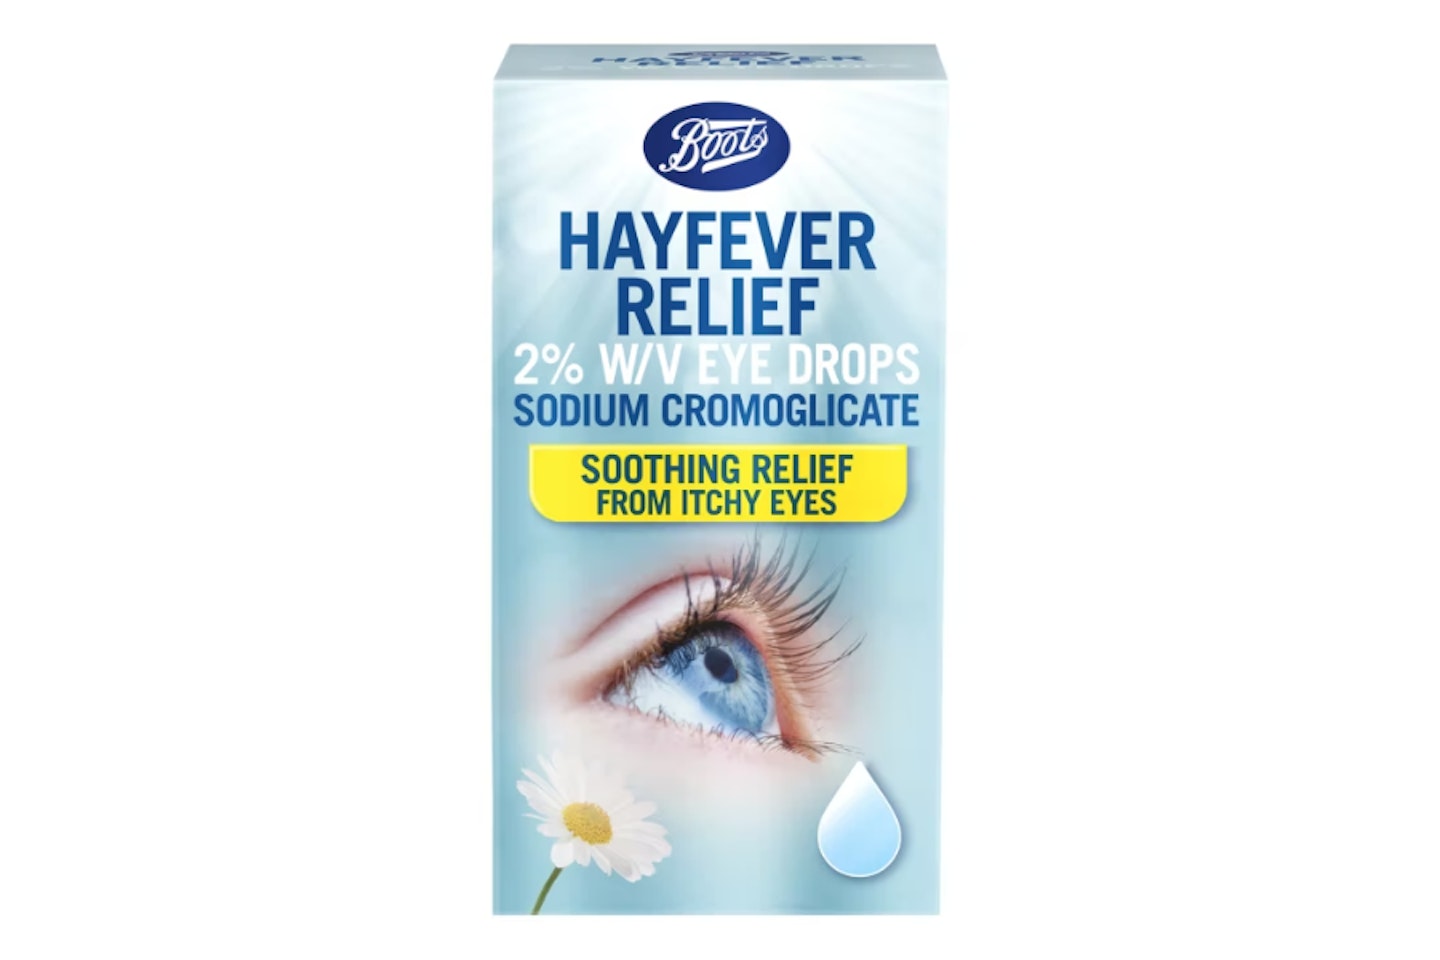 Boots Hayfever Relief 2% w/v Eye Drops - 10ml - one of the best hay fever eye drops